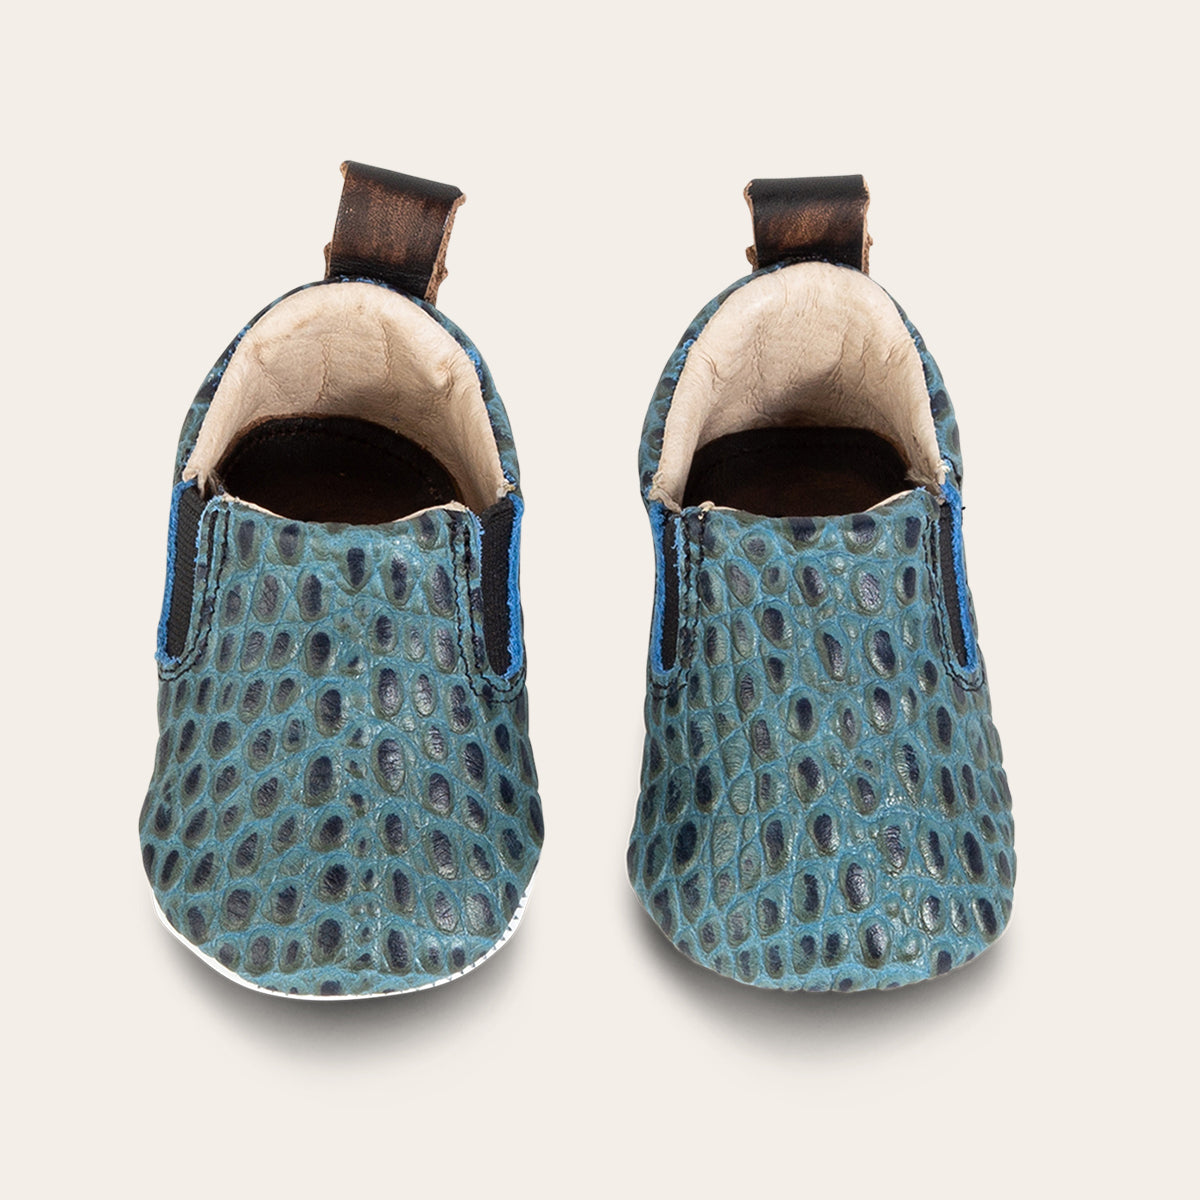 top view showing heel pull tab and side elastic panel on FREEBIRD infant baby kicks turquoise croco leather shoe